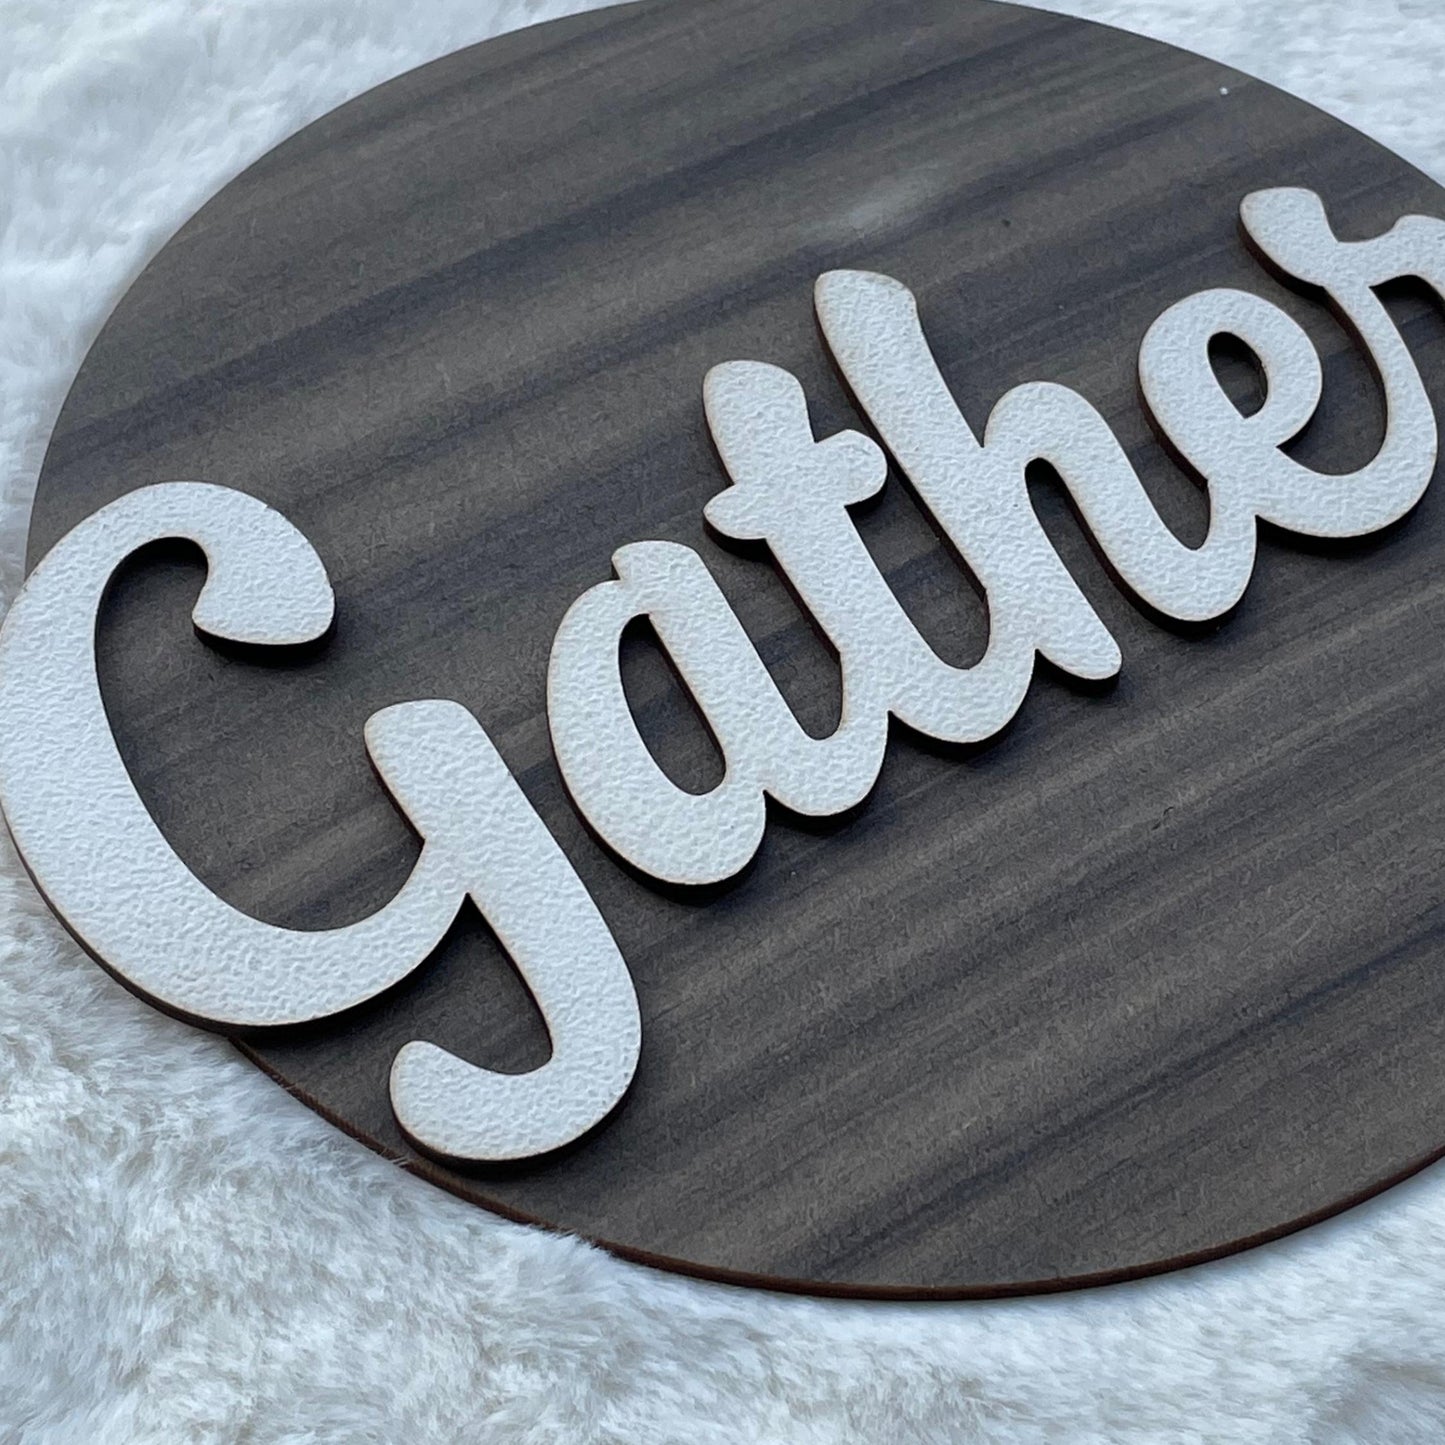 GATHER 3D Circle Wall Art With Sturdy Base and 3D Letters